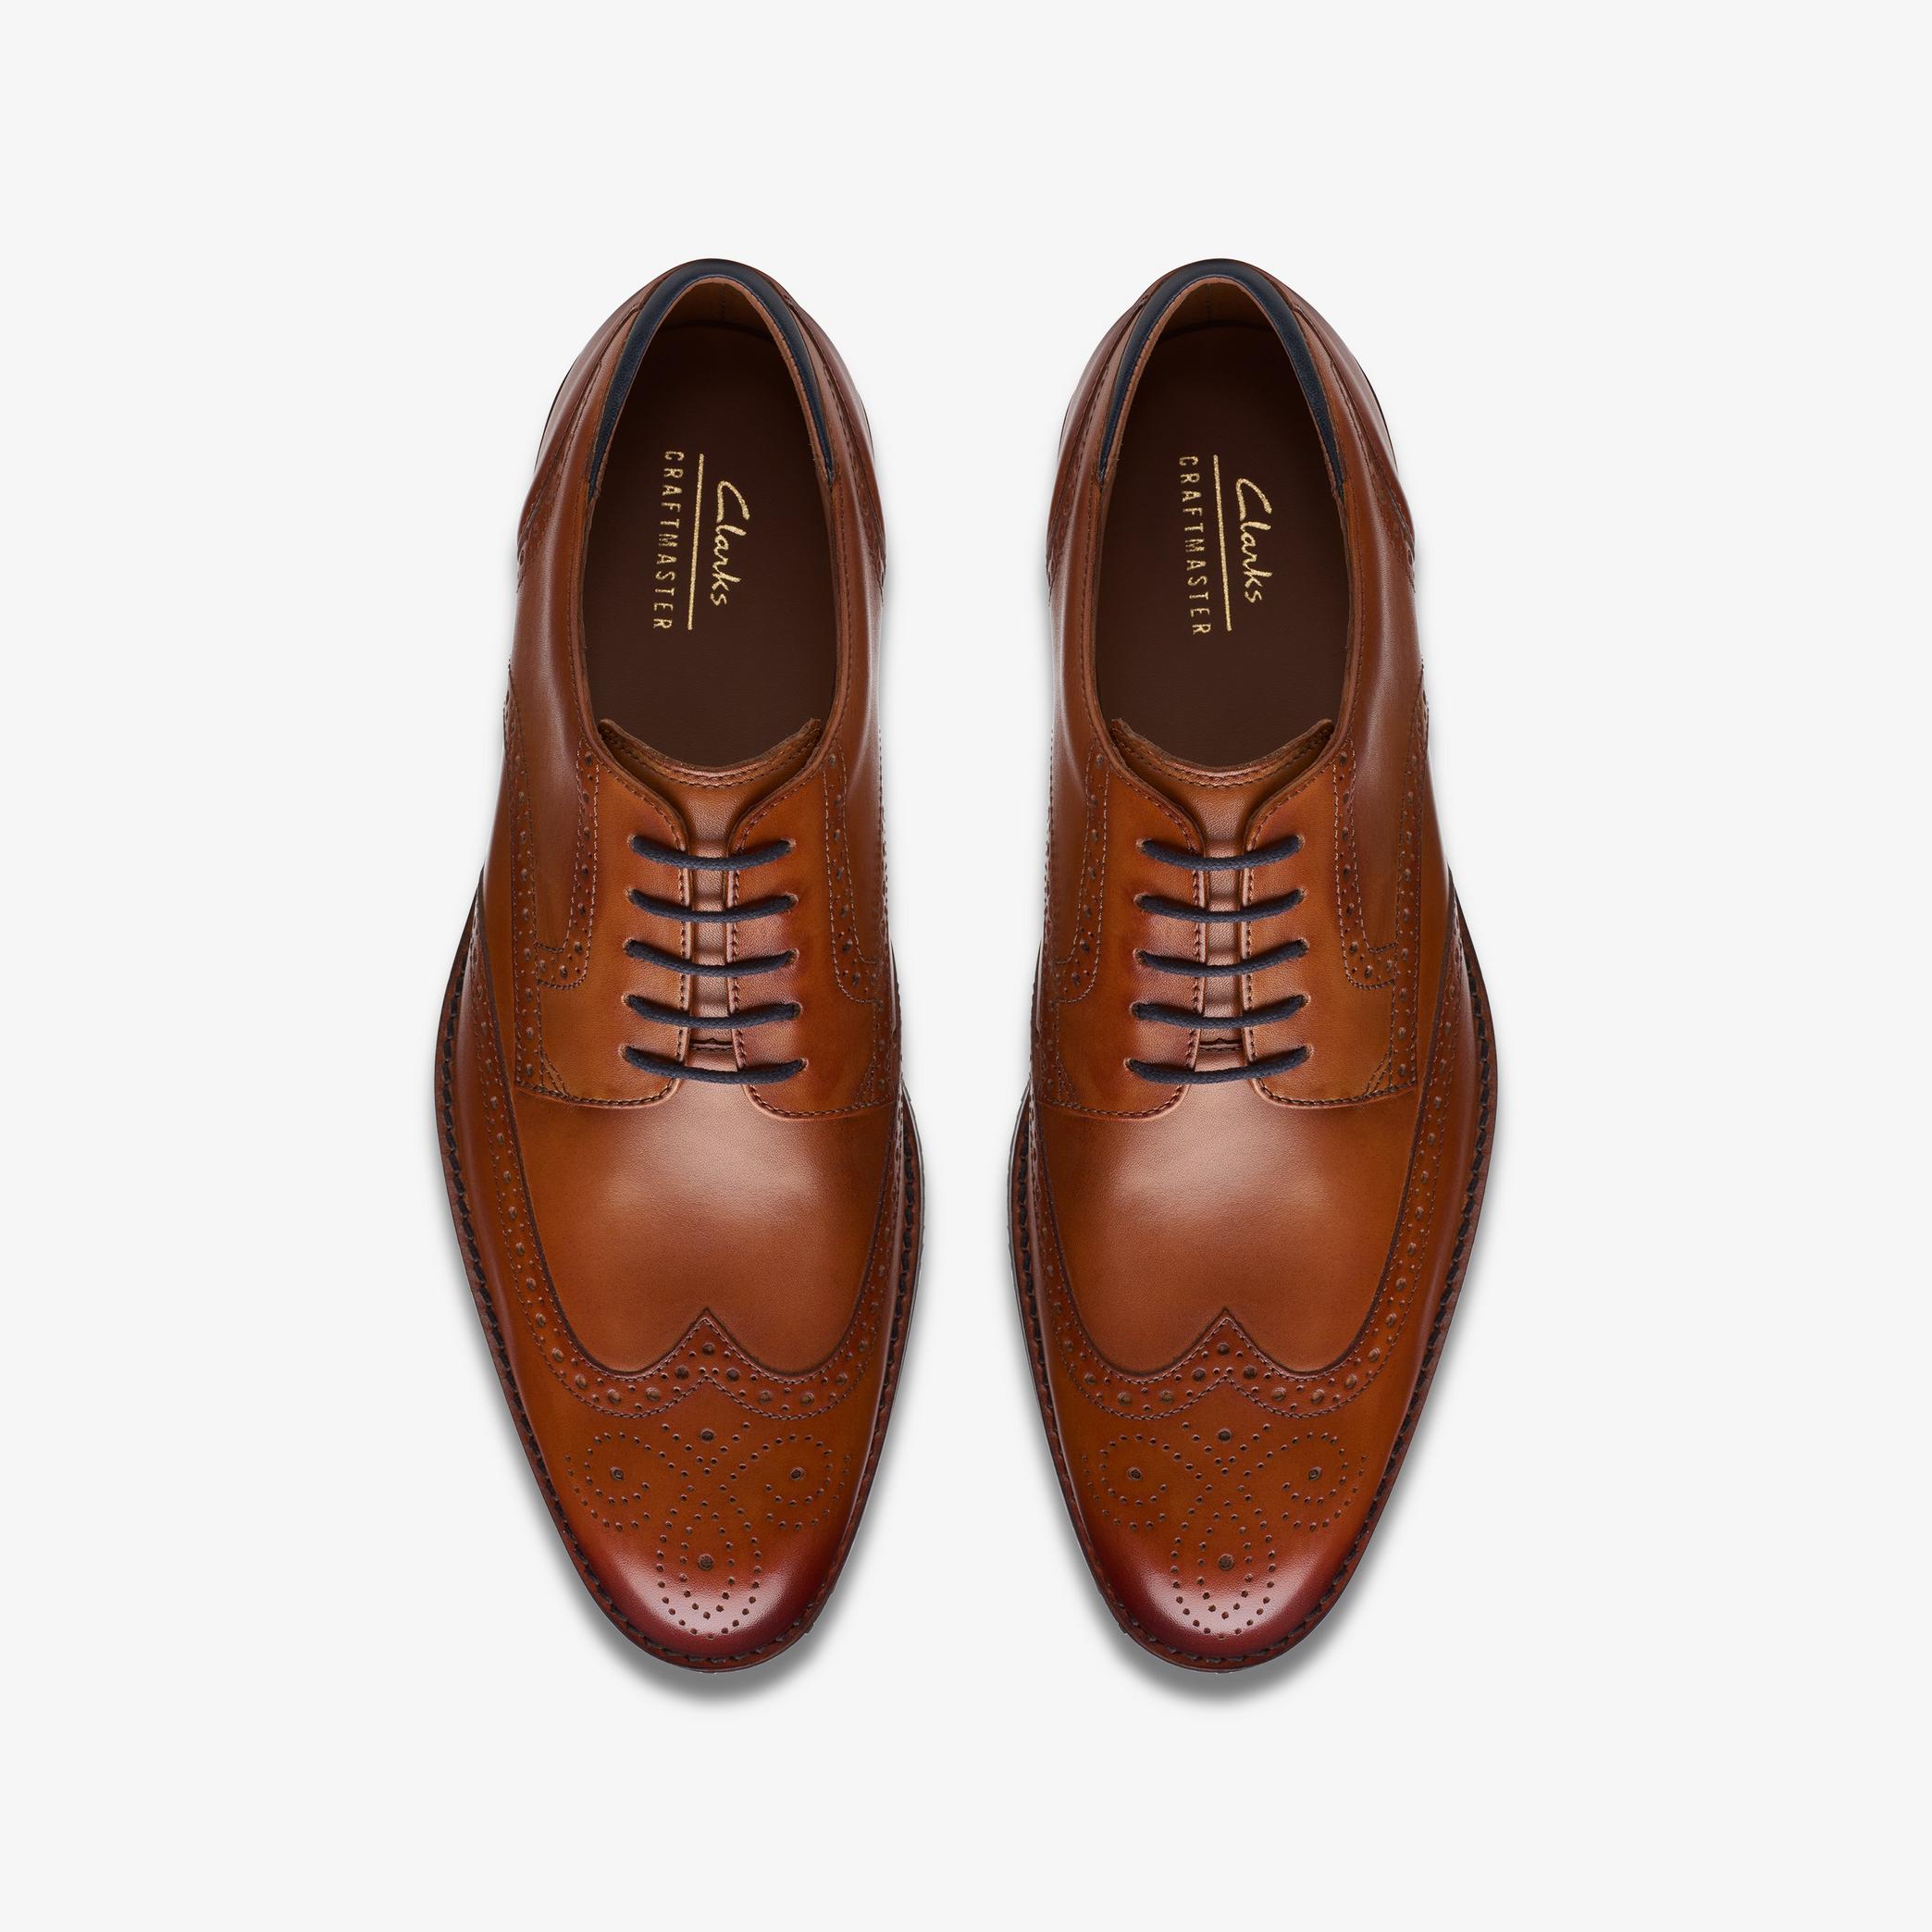 Craft Arlo Limit Tan Leather Oxford Shoes, view 6 of 8